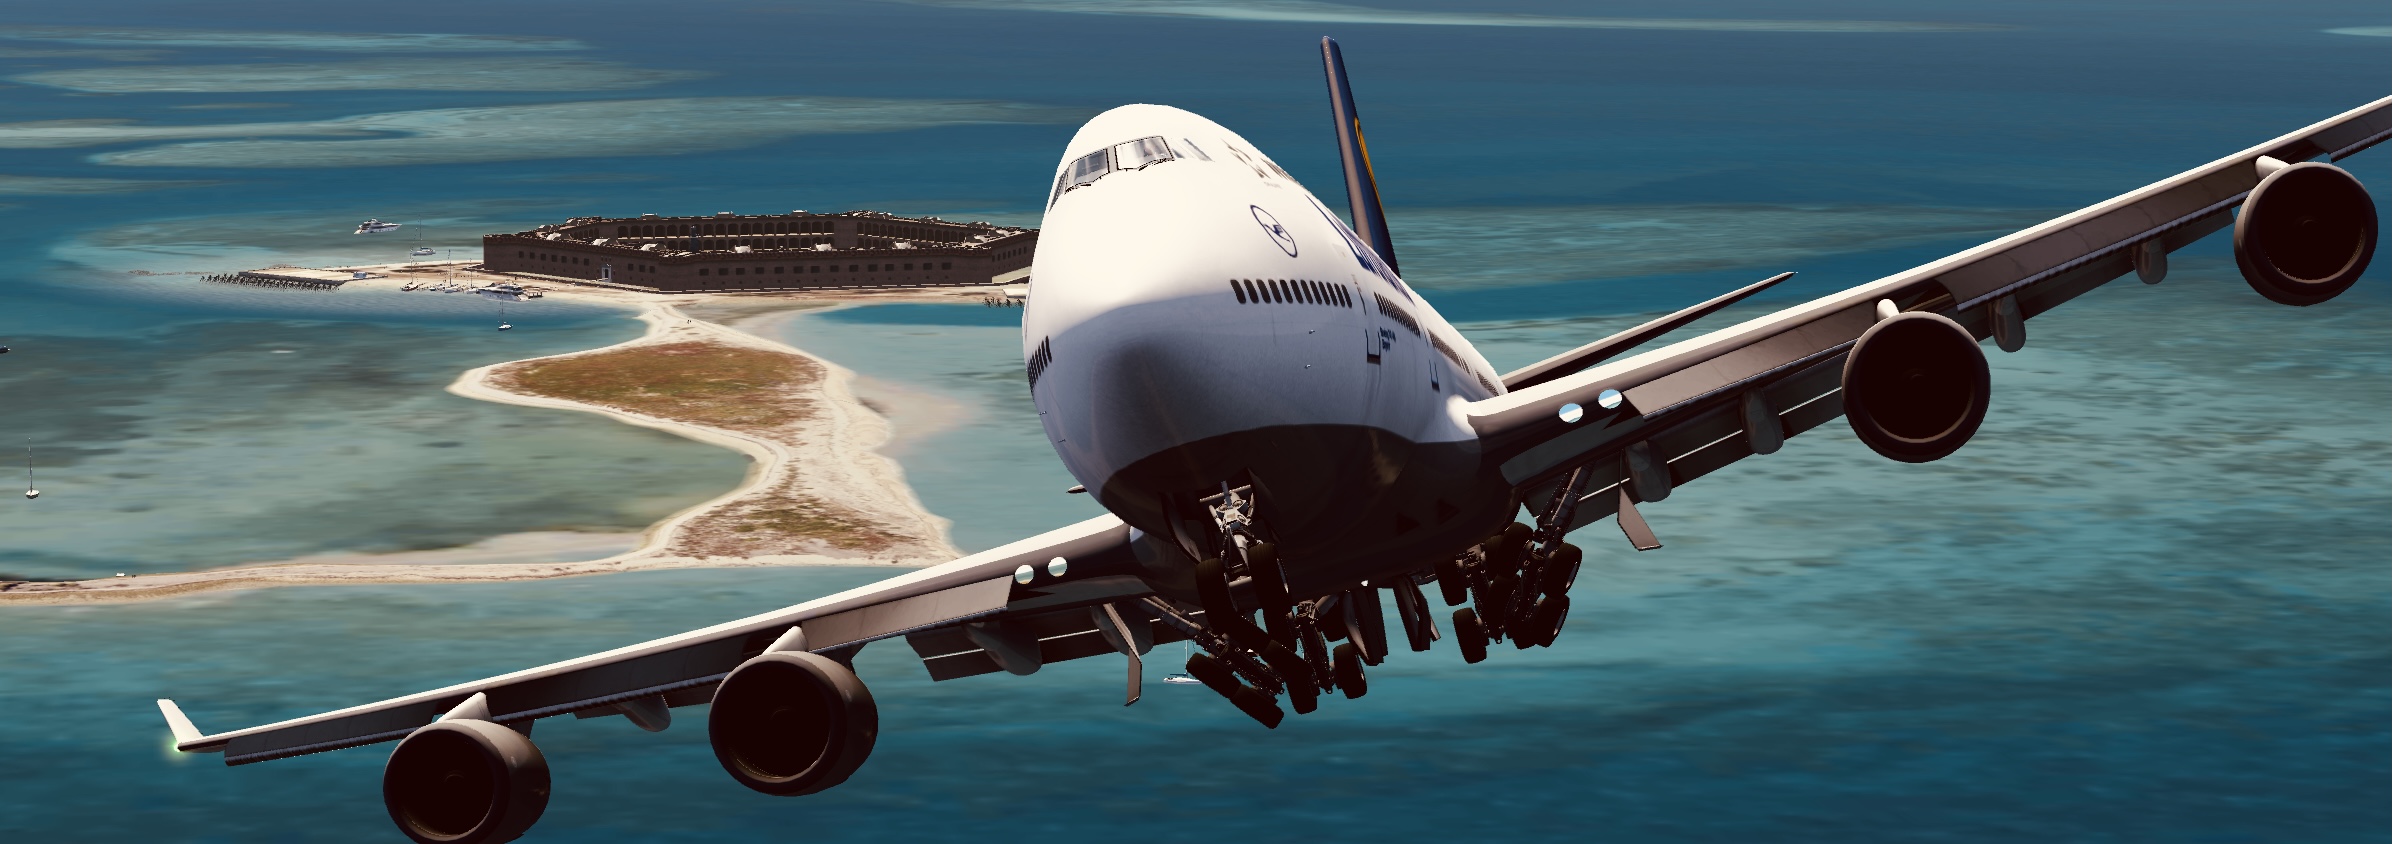 747 is able to land and take off at this caribbean island